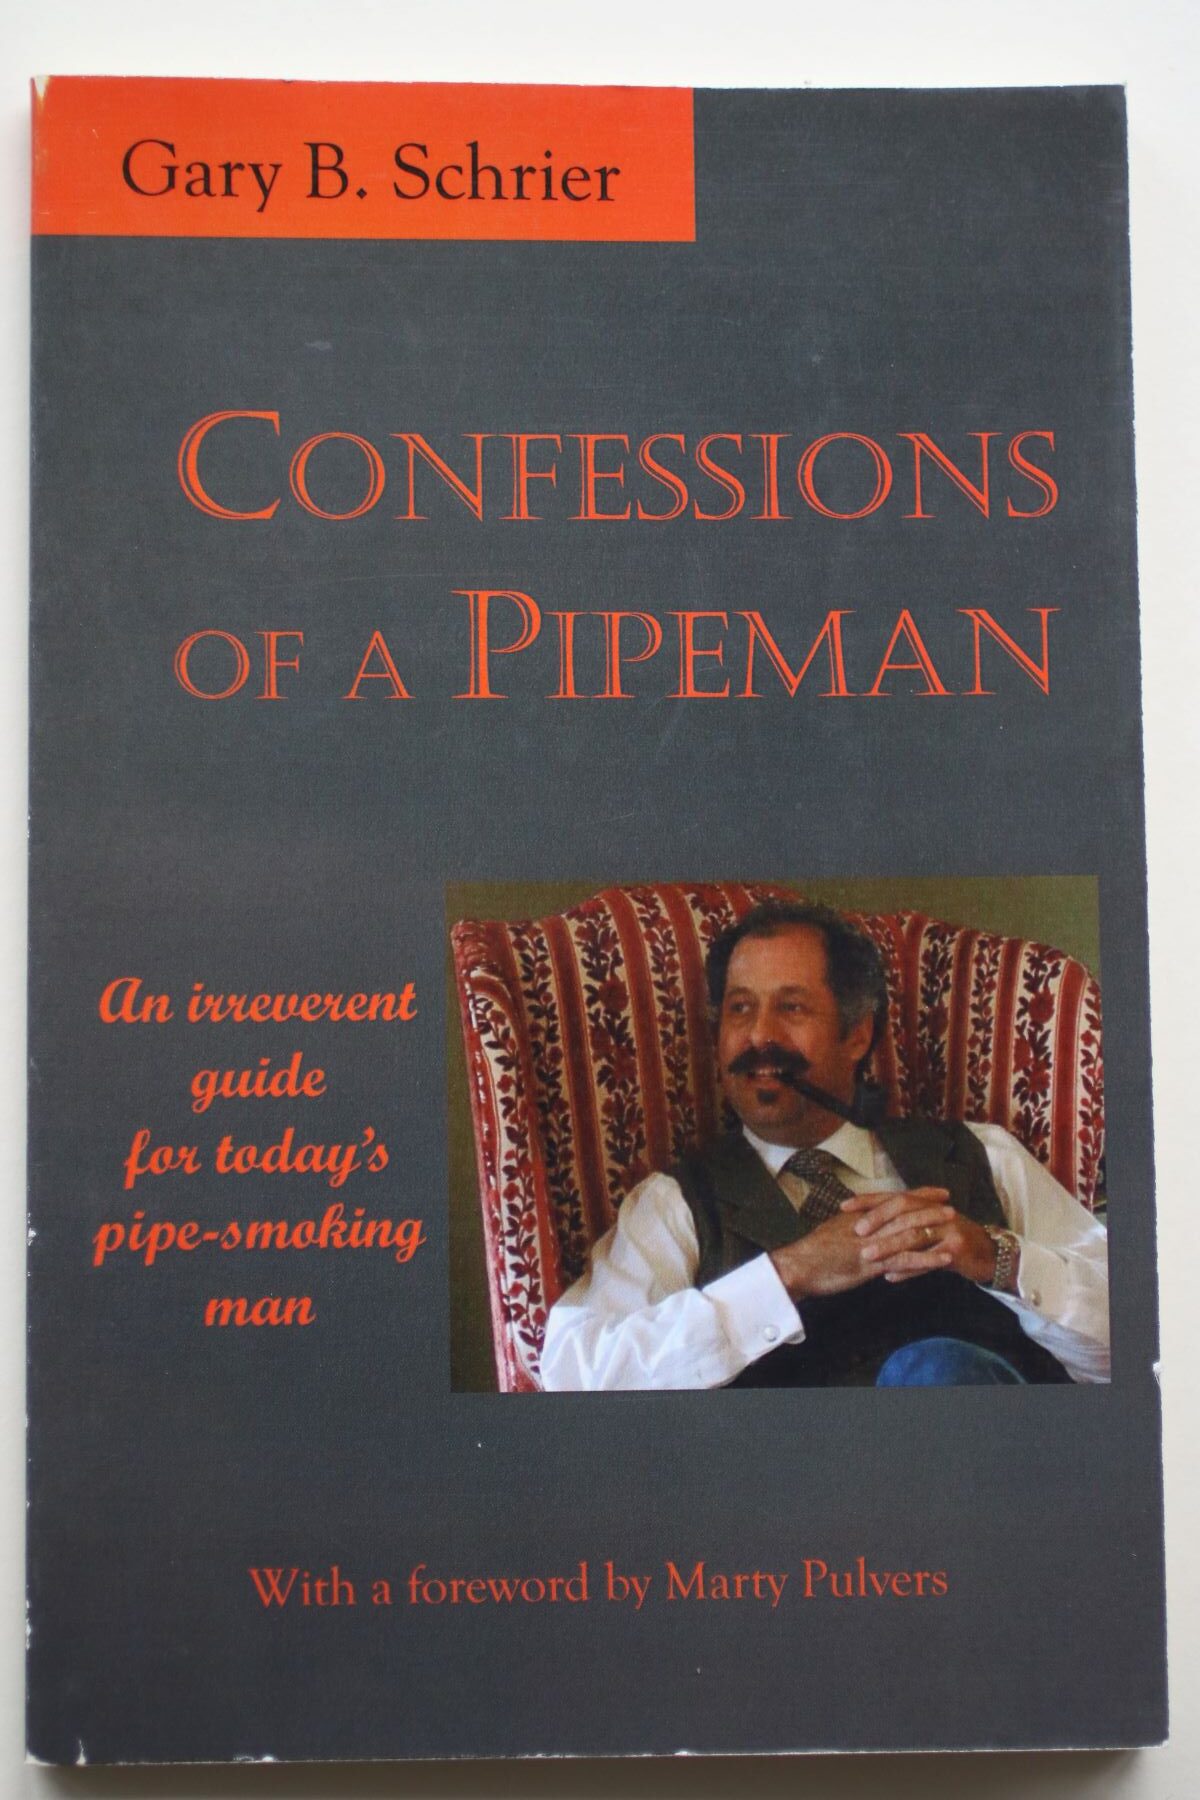 Confessions of a Pipeman - Gary B Schrier Image